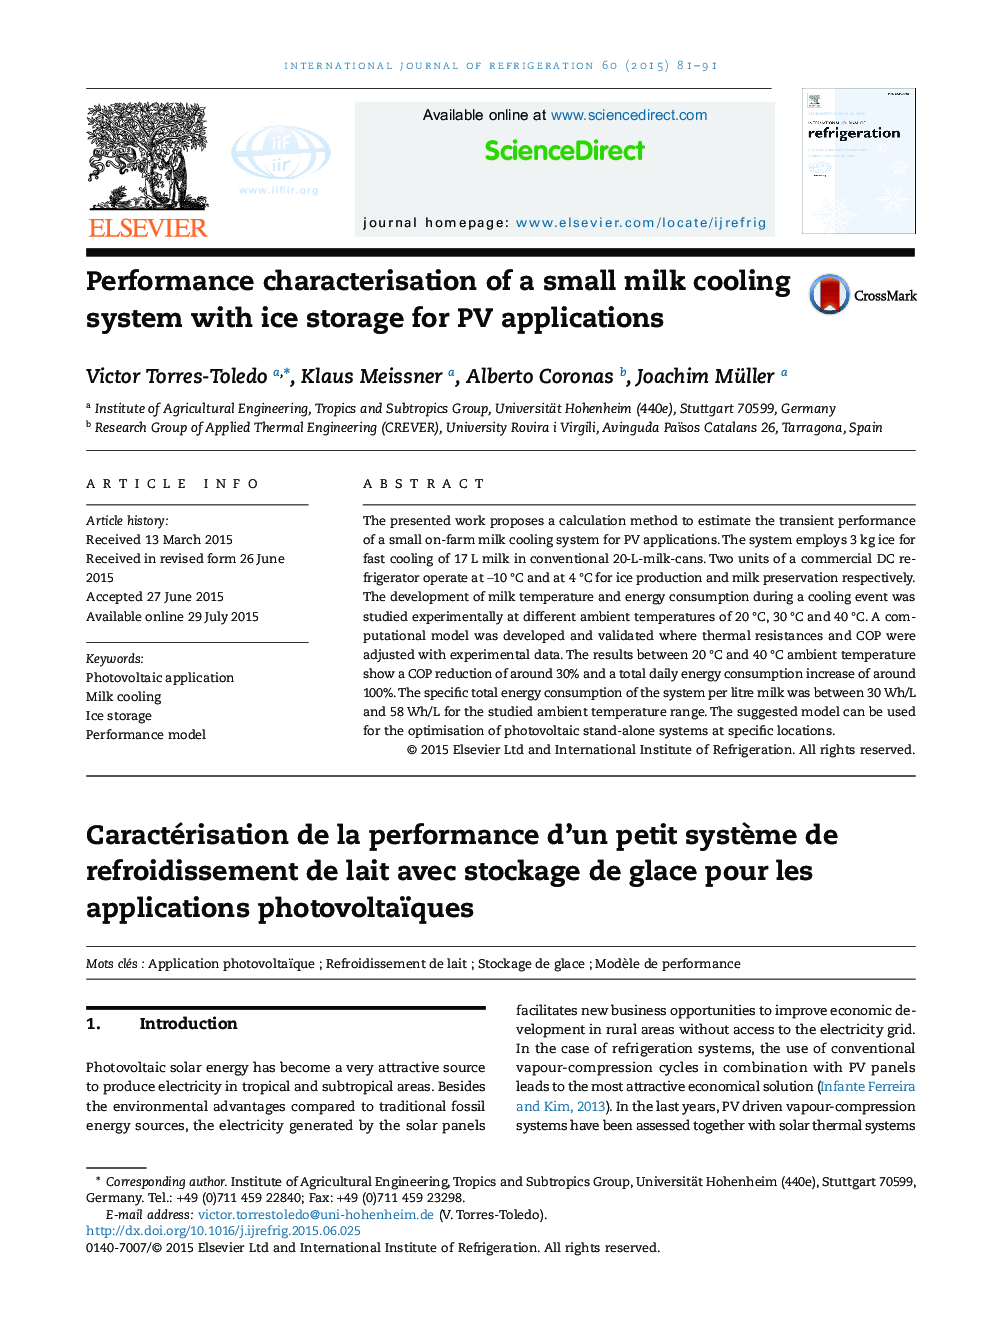 Performance characterisation of a small milk cooling system with ice storage for PV applications